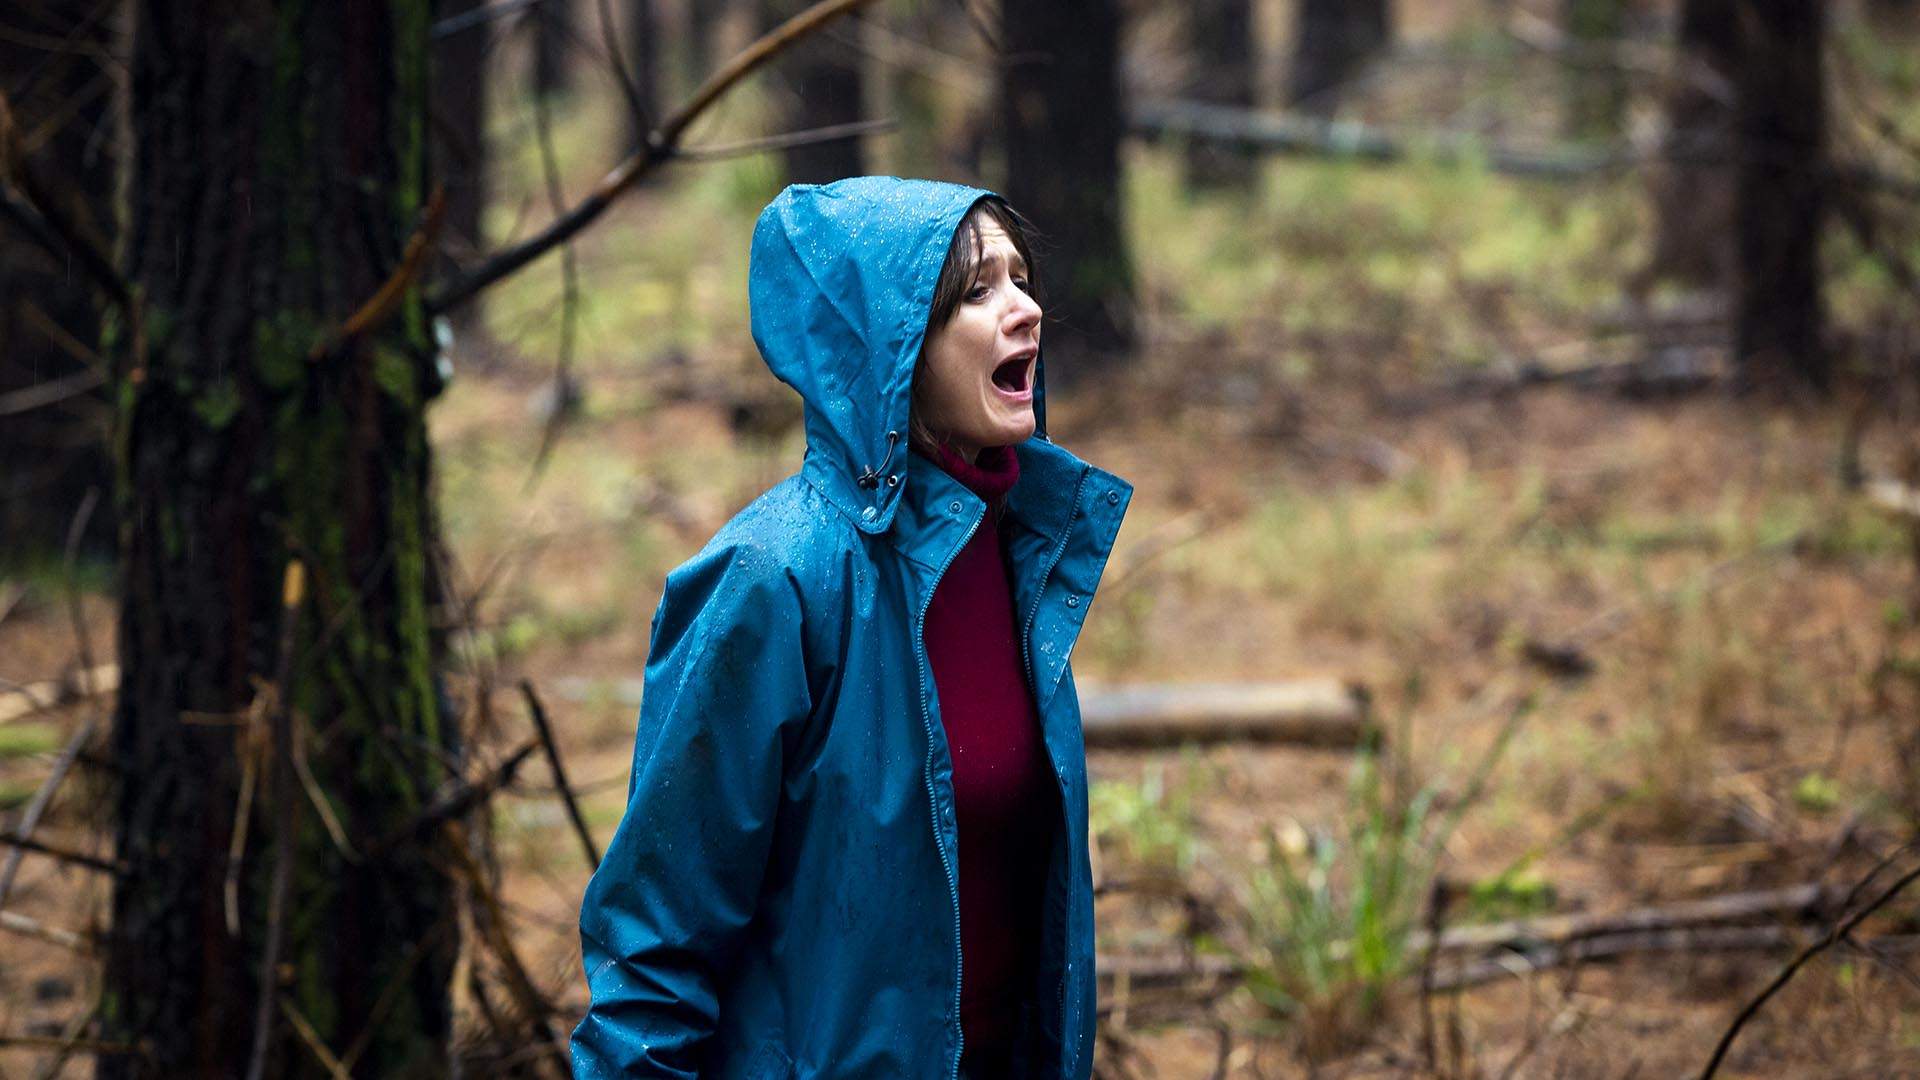 The Trailer for Eerie and Unnerving New Australian Horror Film 'Relic' Is Here to Creep You Out